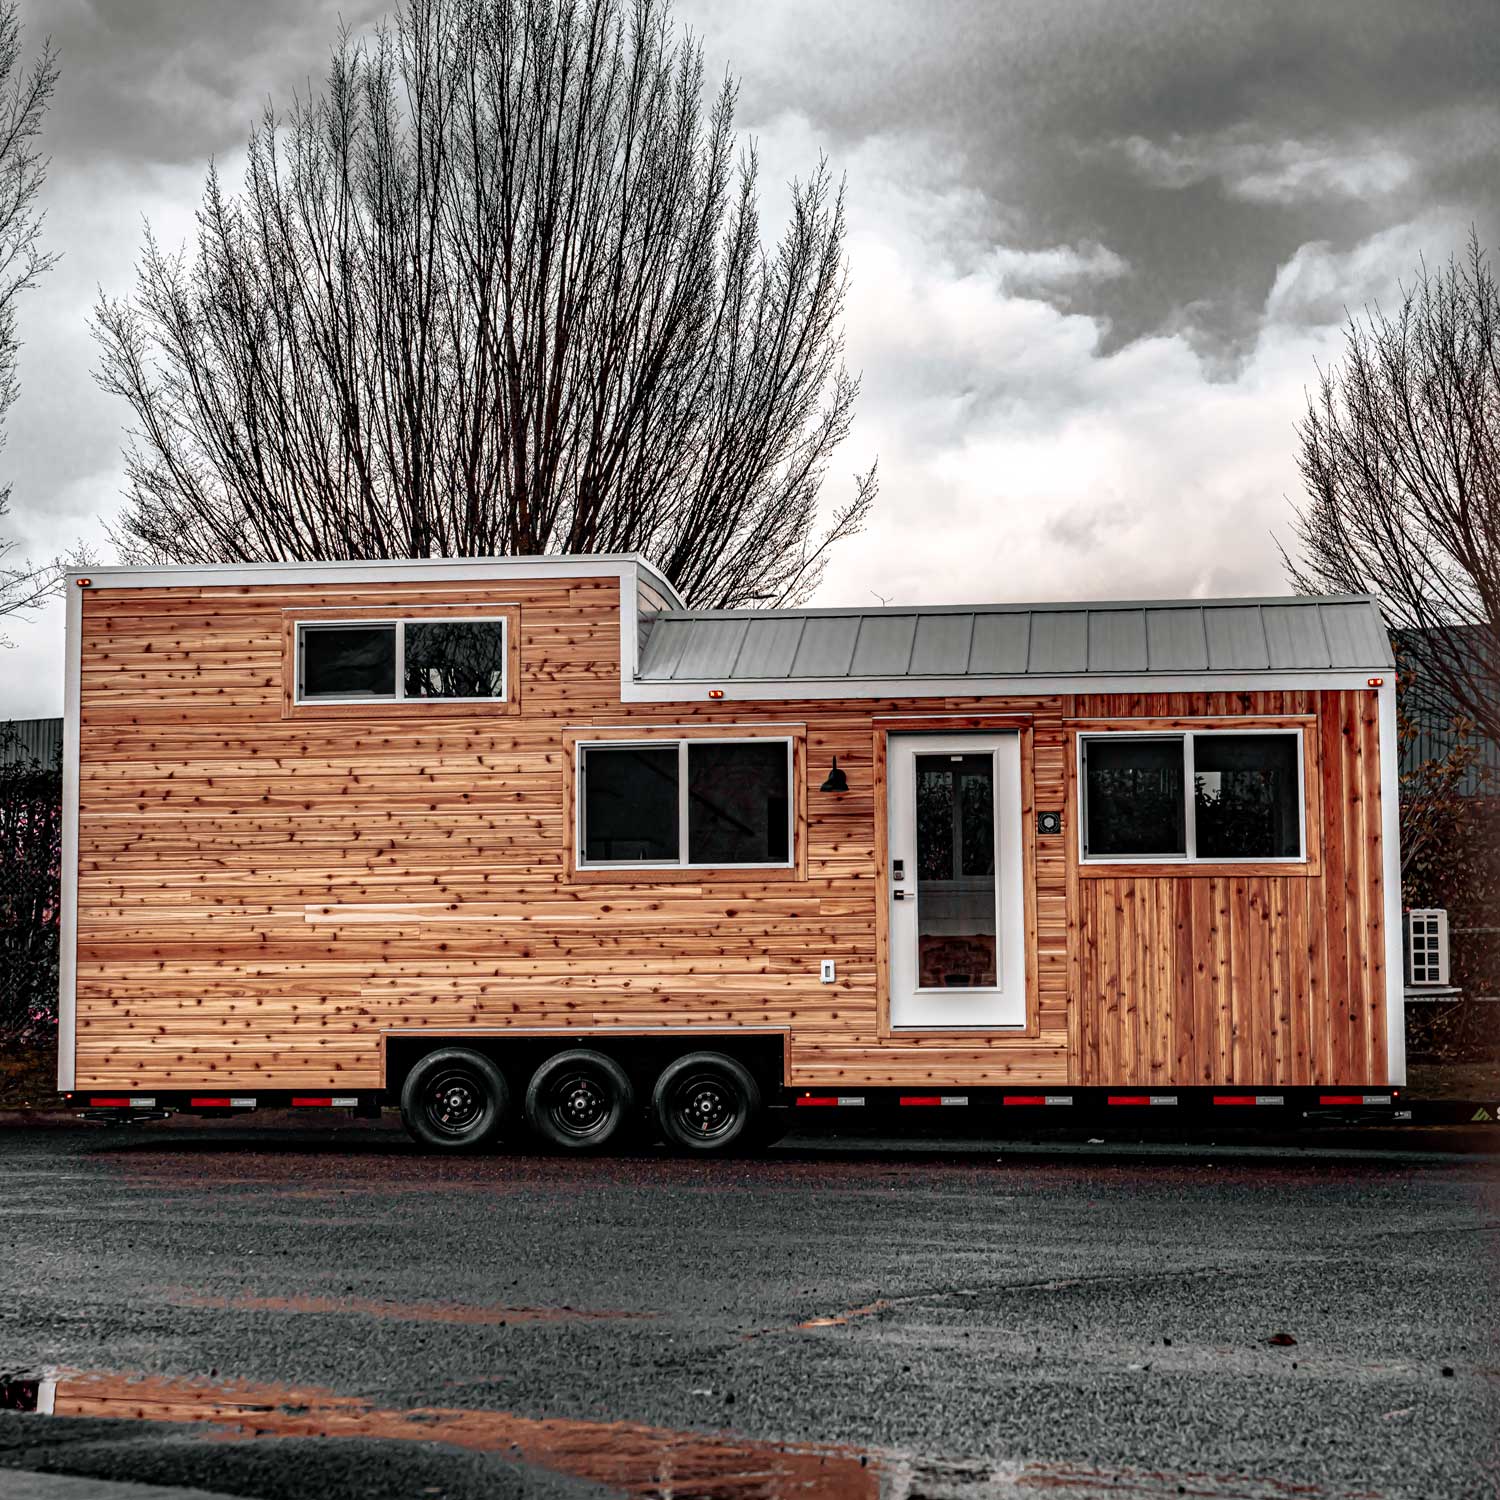 Modern style Heritage tiny home outside view with cloudy sky and trees in the background